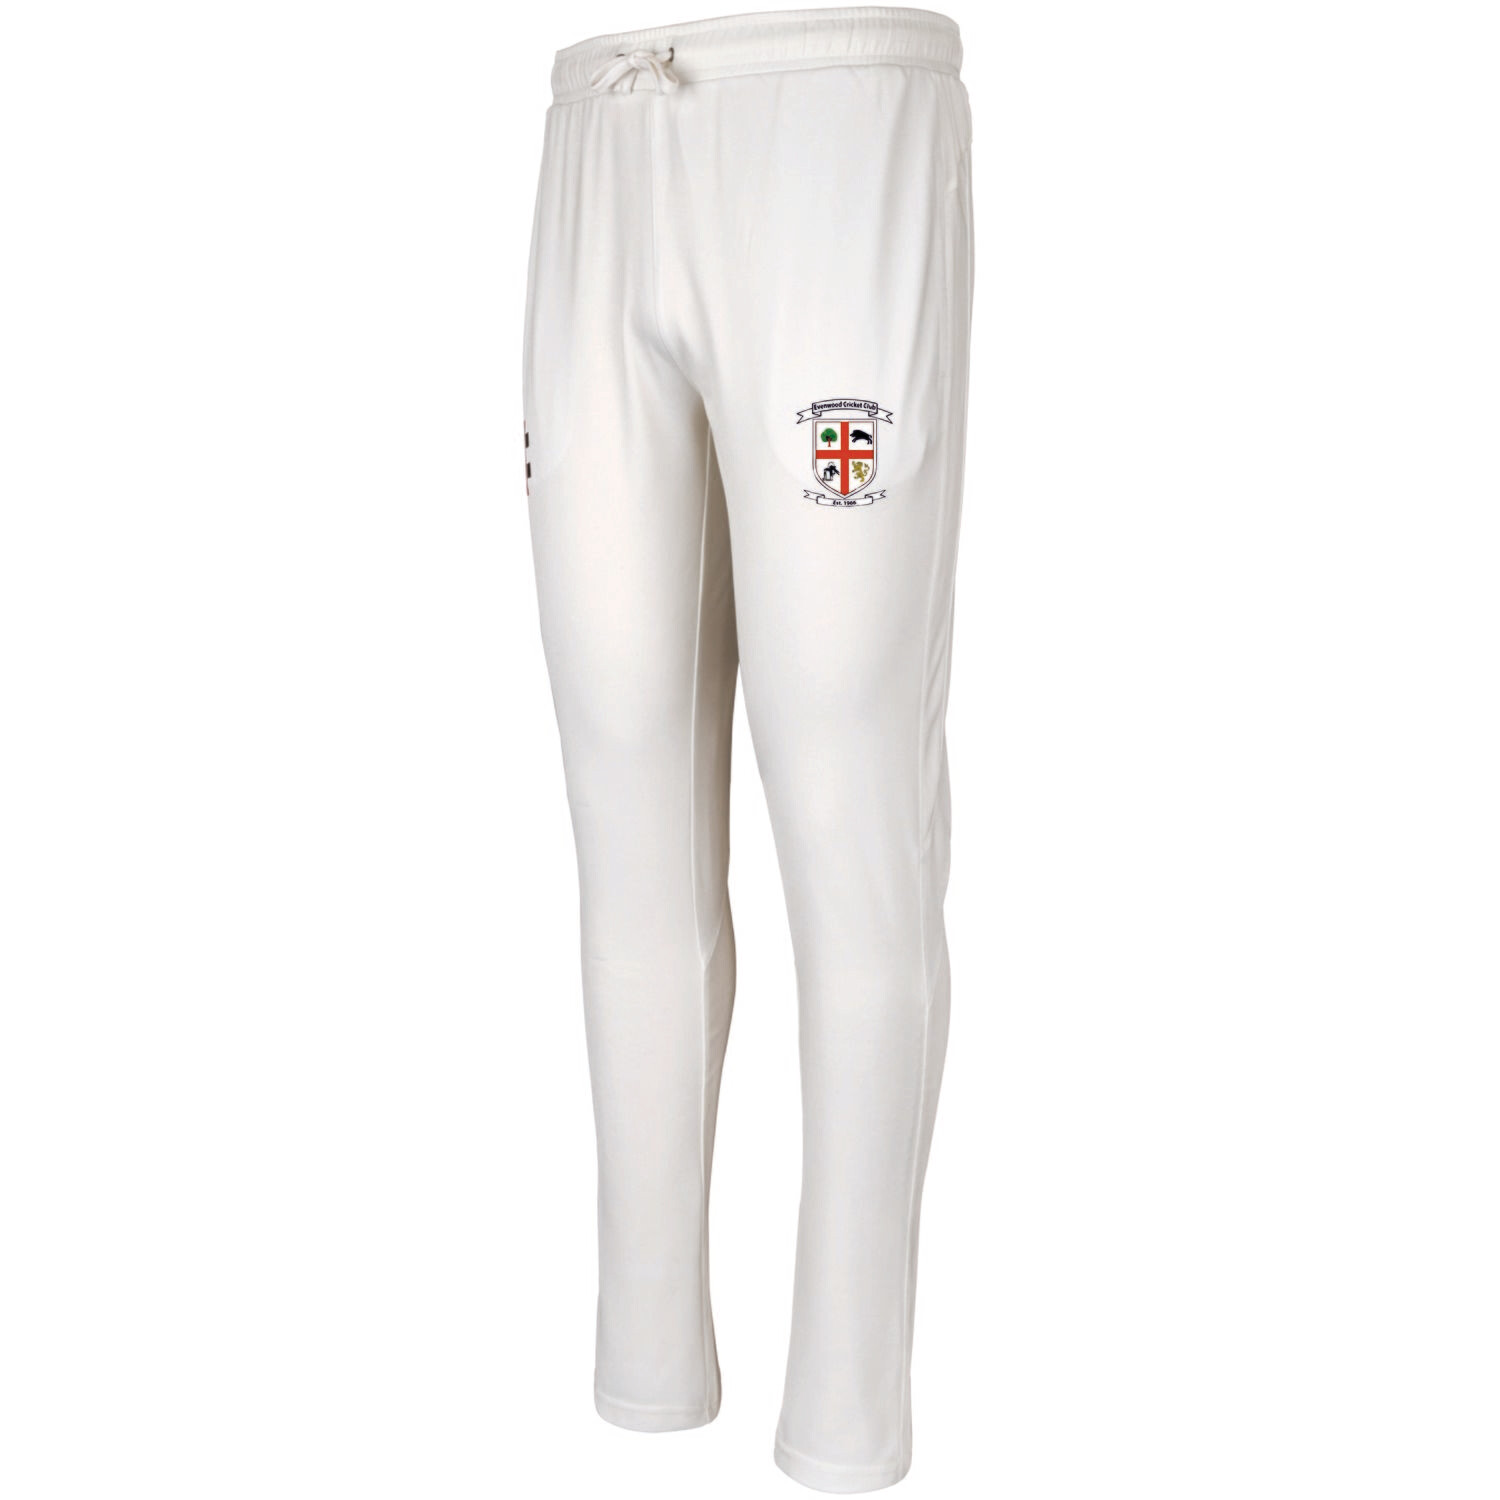 Evenwood Pro Performance Cricket Trousers Adult